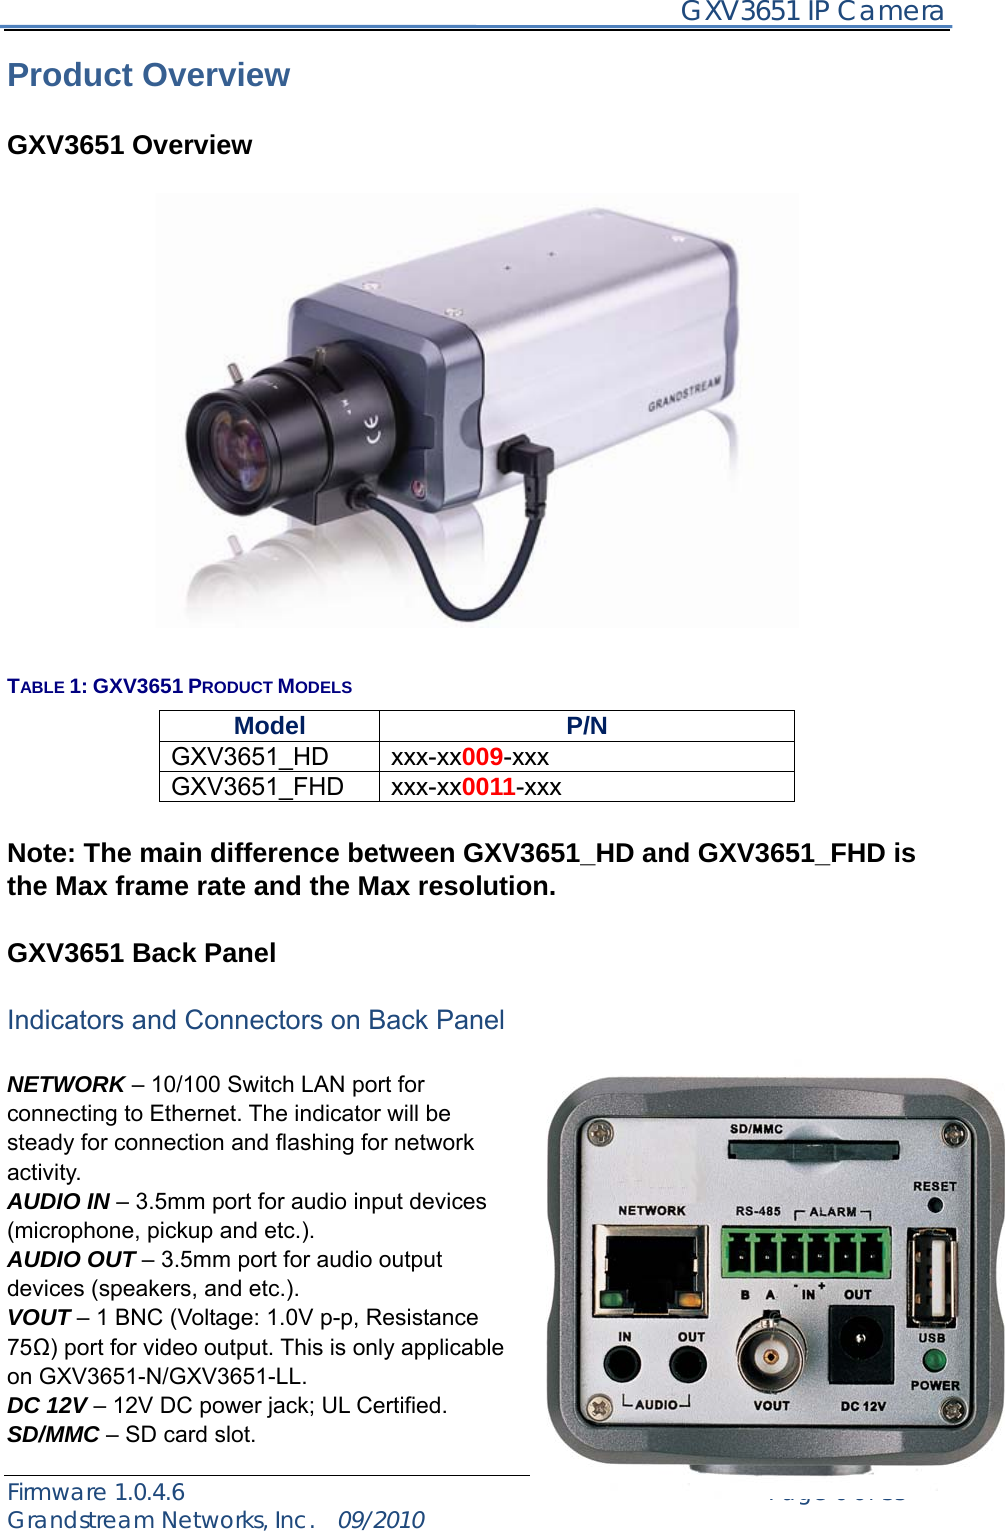     GXV3651 IP Camera Firmware 1.0.4.6                                                   Page 6 of 35    Grandstream Networks, Inc.  09/2010  Product Overview  GXV3651 Overview    TABLE 1: GXV3651 PRODUCT MODELS Model P/N GXV3651_HD xxx-xx009-xxx GXV3651_FHD xxx-xx0011-xxx  Note: The main difference between GXV3651_HD and GXV3651_FHD is the Max frame rate and the Max resolution.  GXV3651 Back Panel  Indicators and Connectors on Back Panel  NETWORK – 10/100 Switch LAN port for connecting to Ethernet. The indicator will be steady for connection and flashing for network activity. AUDIO IN – 3.5mm port for audio input devices (microphone, pickup and etc.). AUDIO OUT – 3.5mm port for audio output devices (speakers, and etc.). VOUT – 1 BNC (Voltage: 1.0V p-p, Resistance 75Ω) port for video output. This is only applicable on GXV3651-N/GXV3651-LL. DC 12V – 12V DC power jack; UL Certified. SD/MMC – SD card slot. 